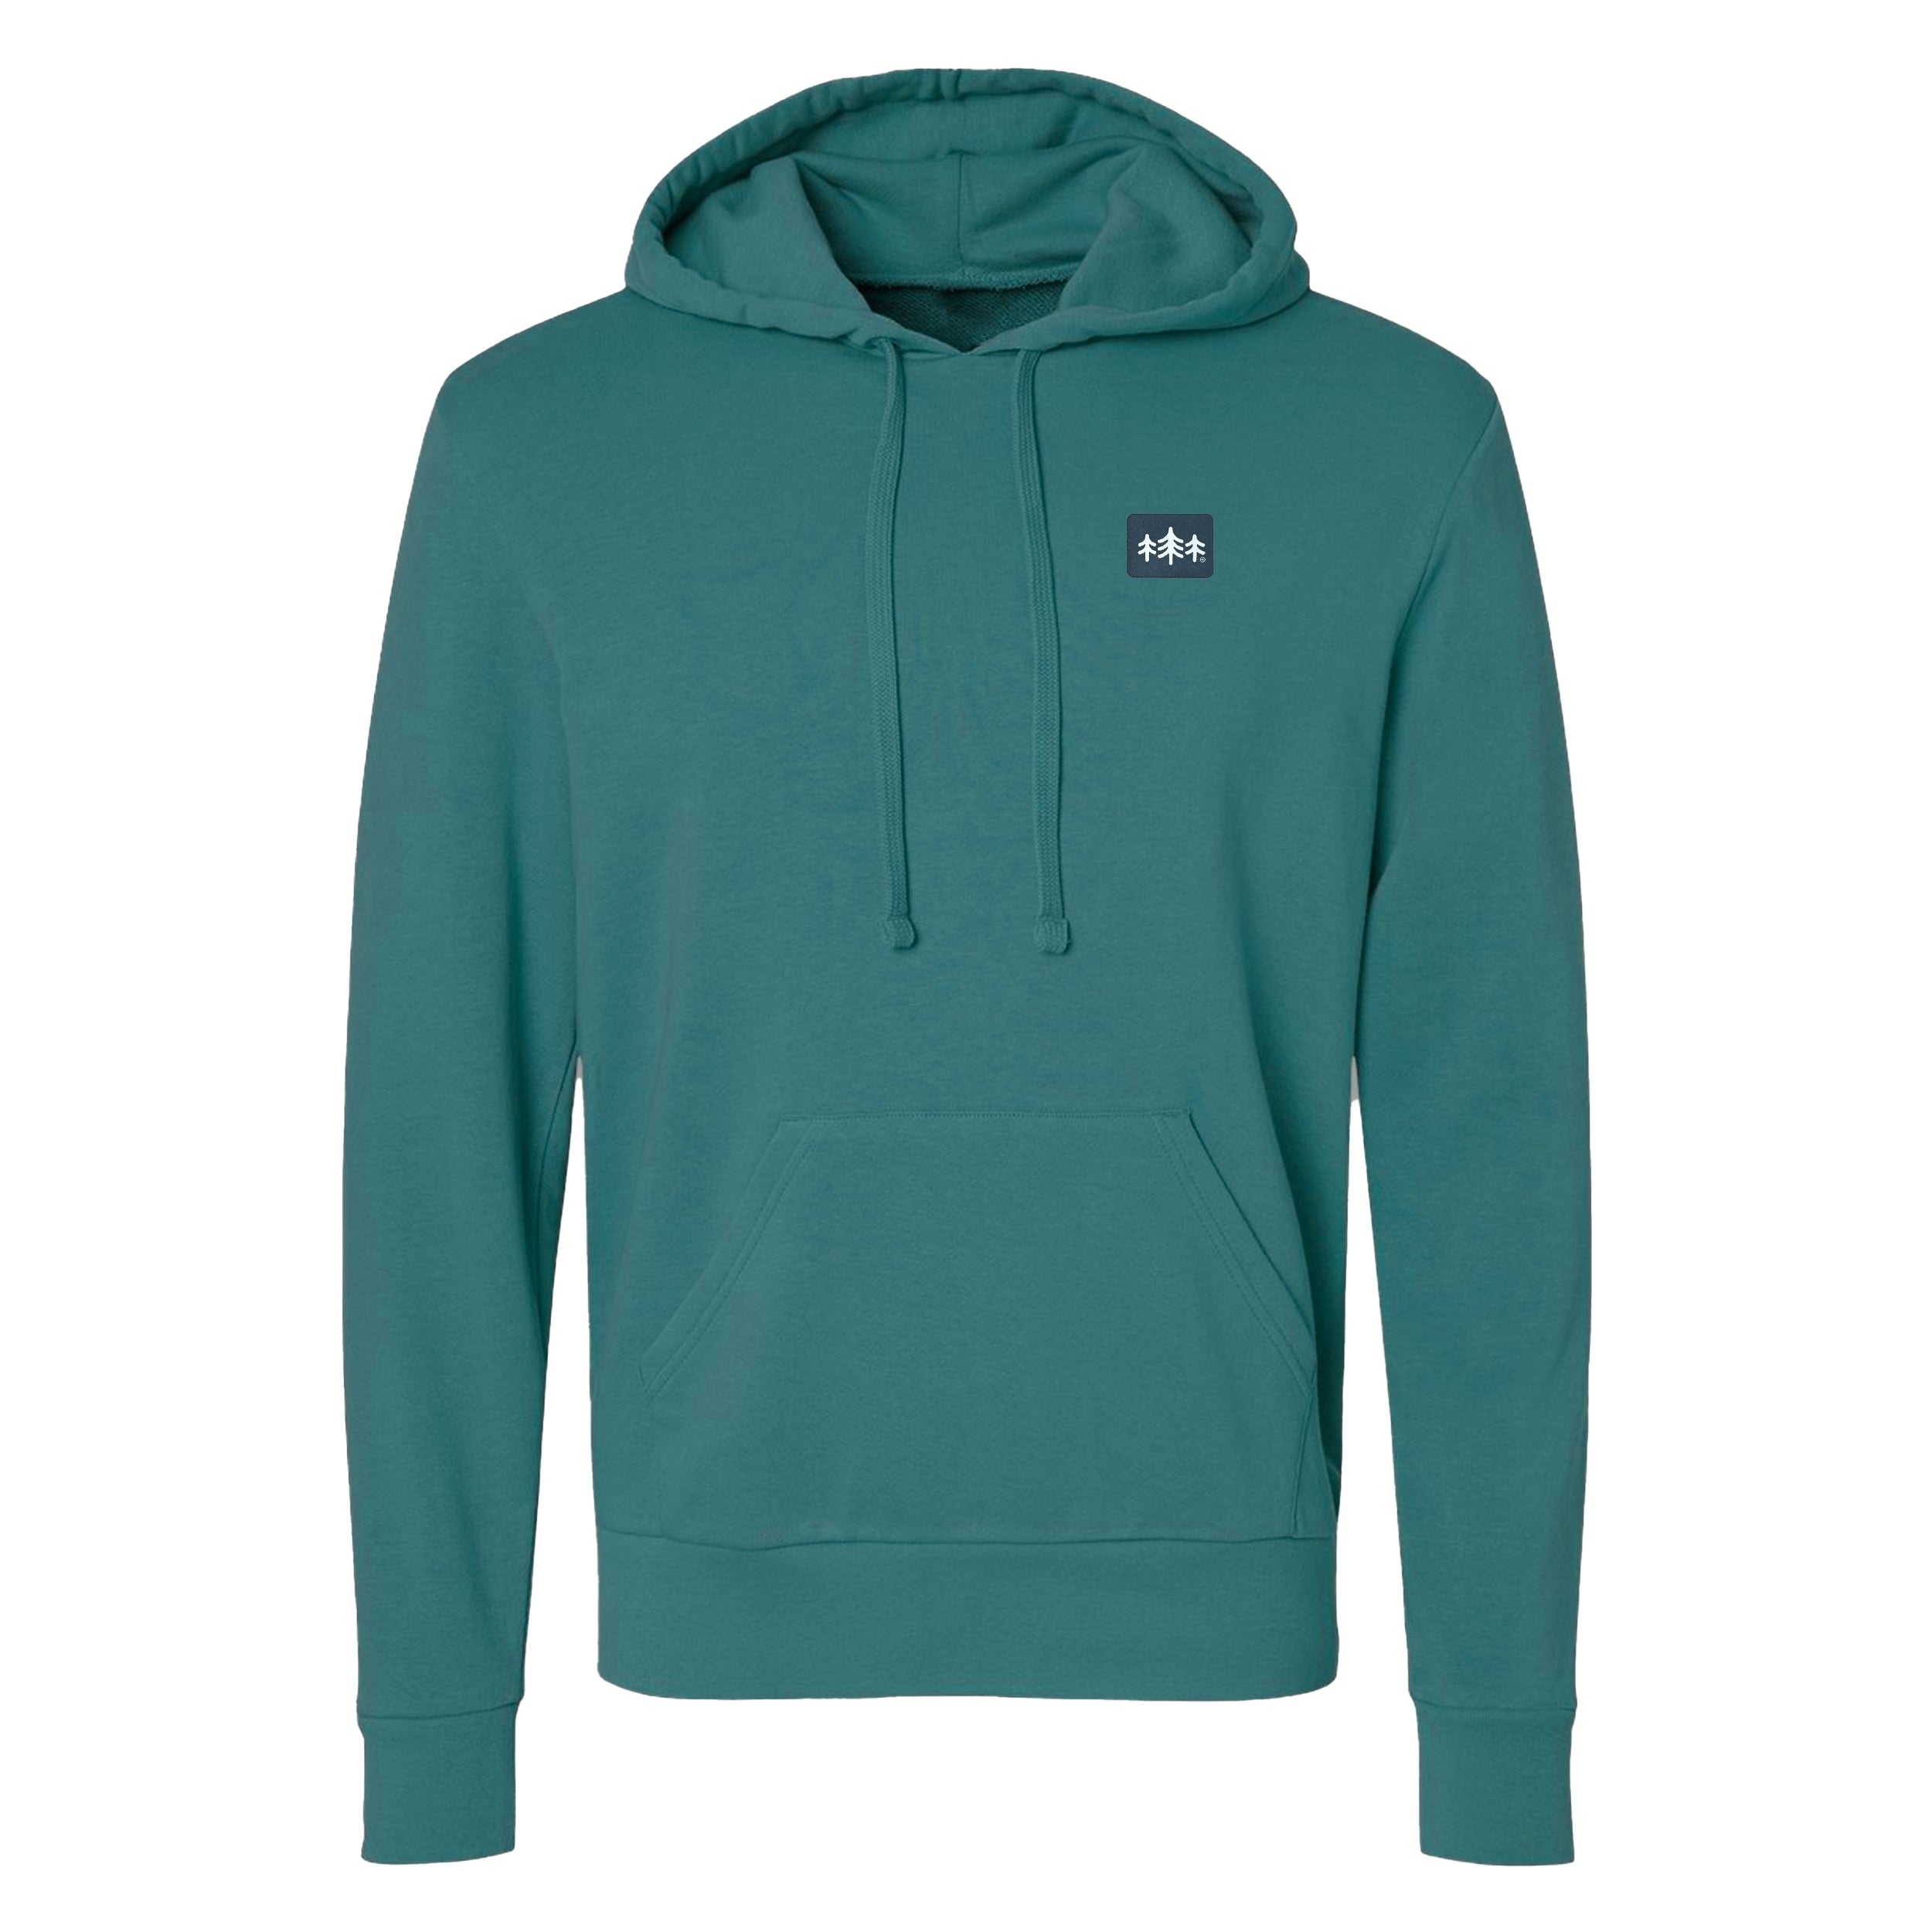 TriPine Lightweight French Terry Hoodie